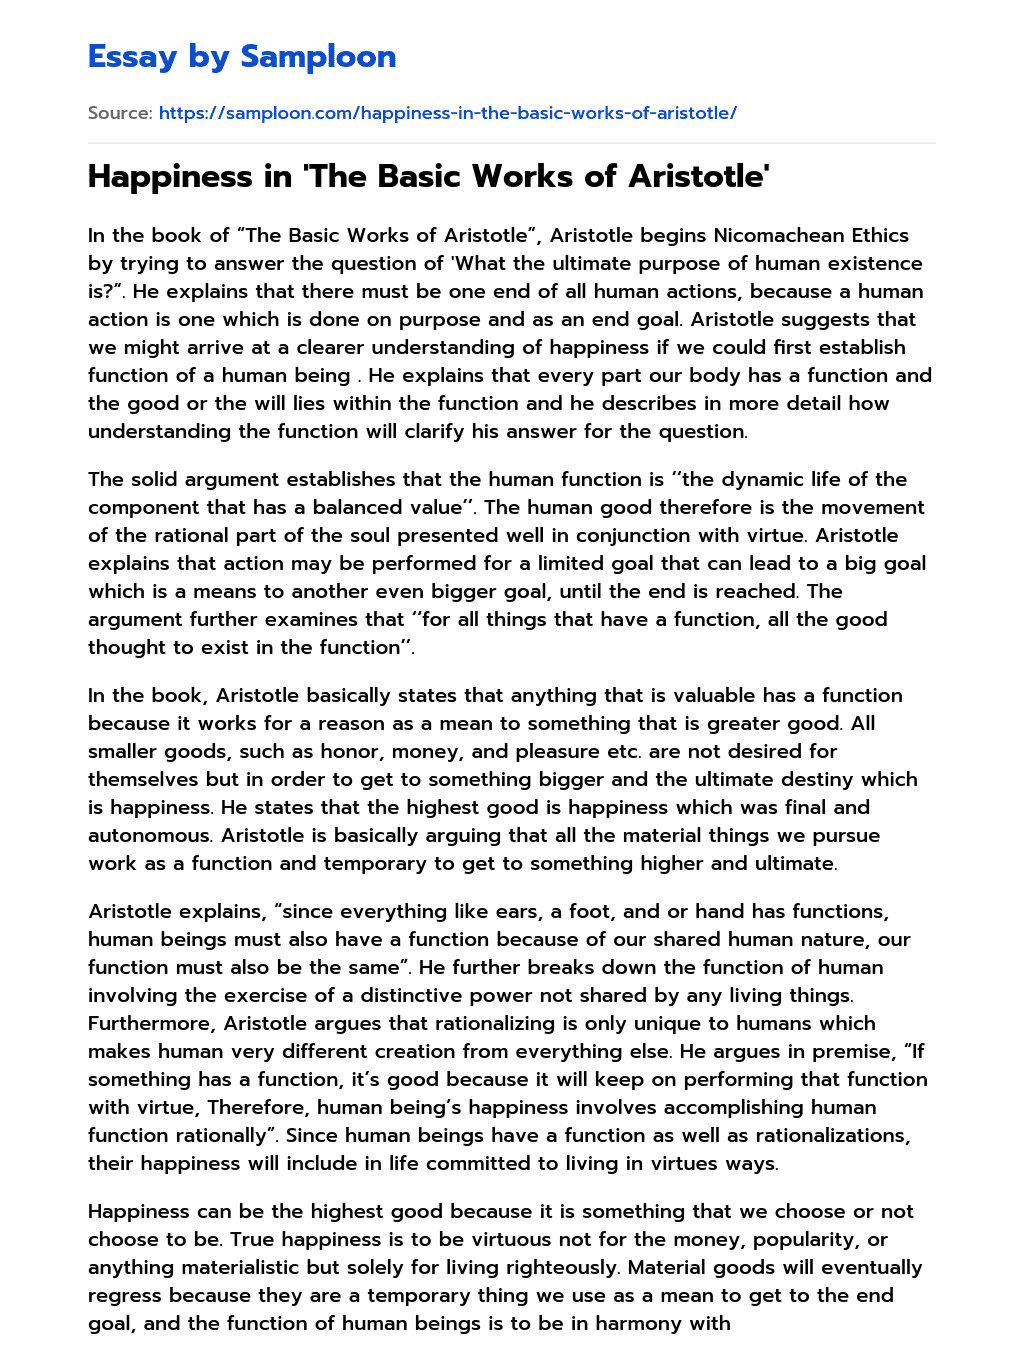 Happiness in ‘The Basic Works of Aristotle’ essay